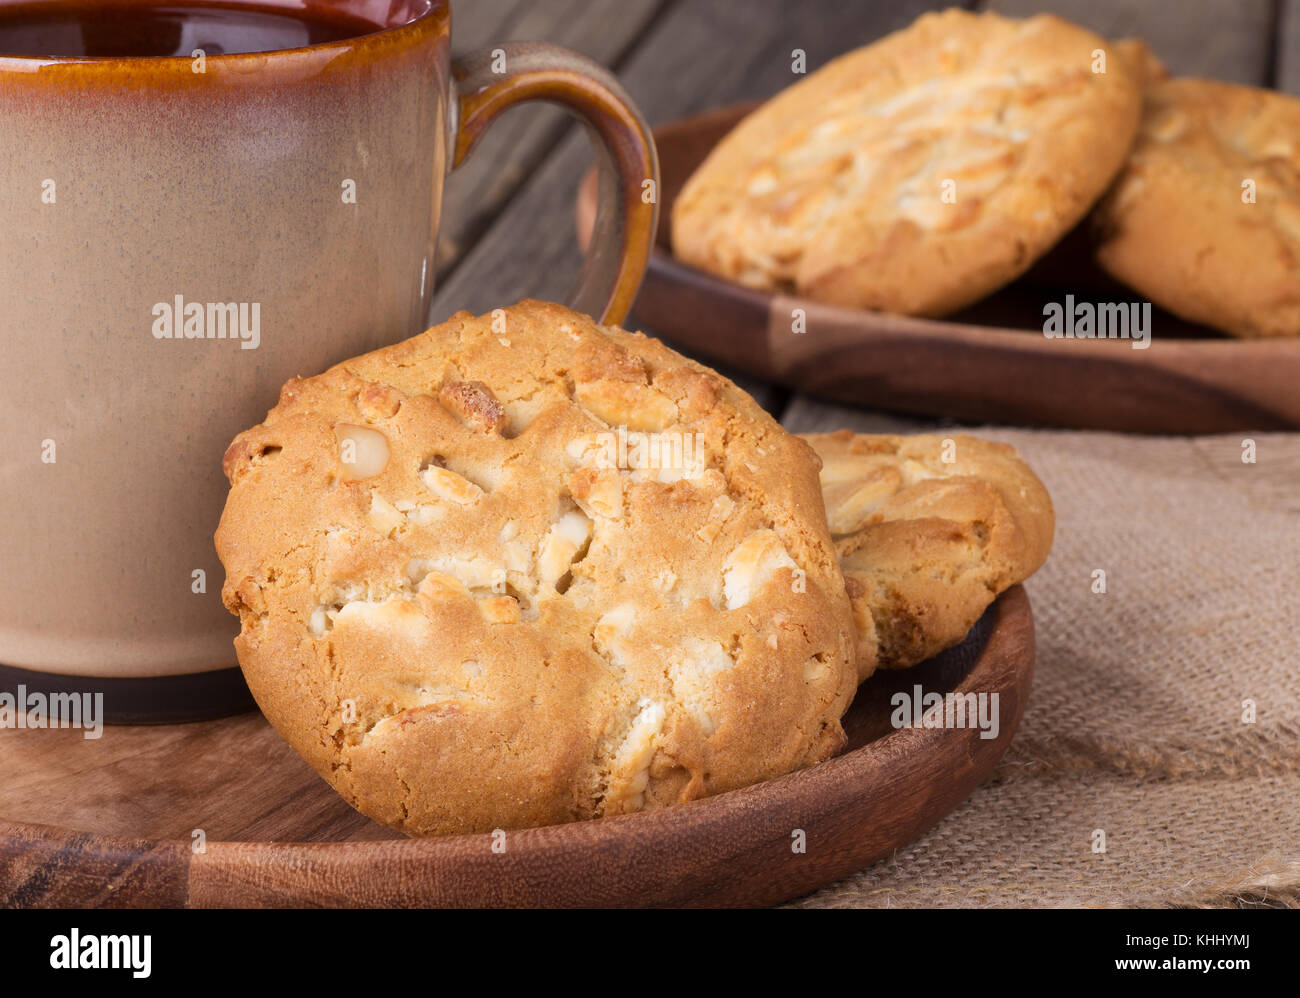 Closeup of white chocolate macadamia nut cookies and cup of coffee Stock Photo